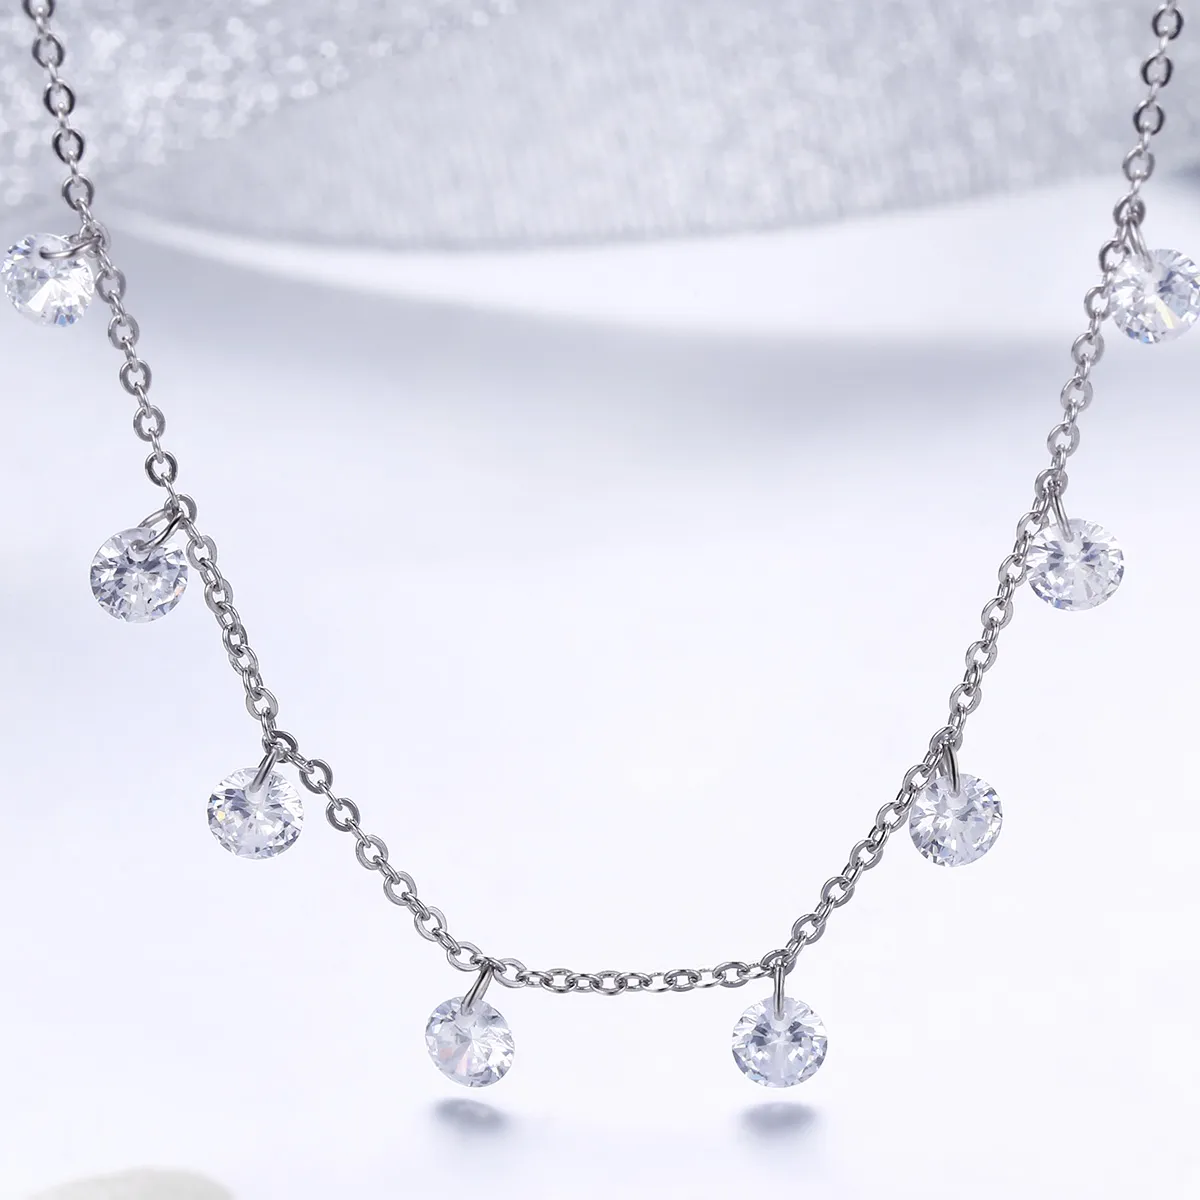 Pandora Style Silver Beauty of Simplicity Chain Necklace - SCN299